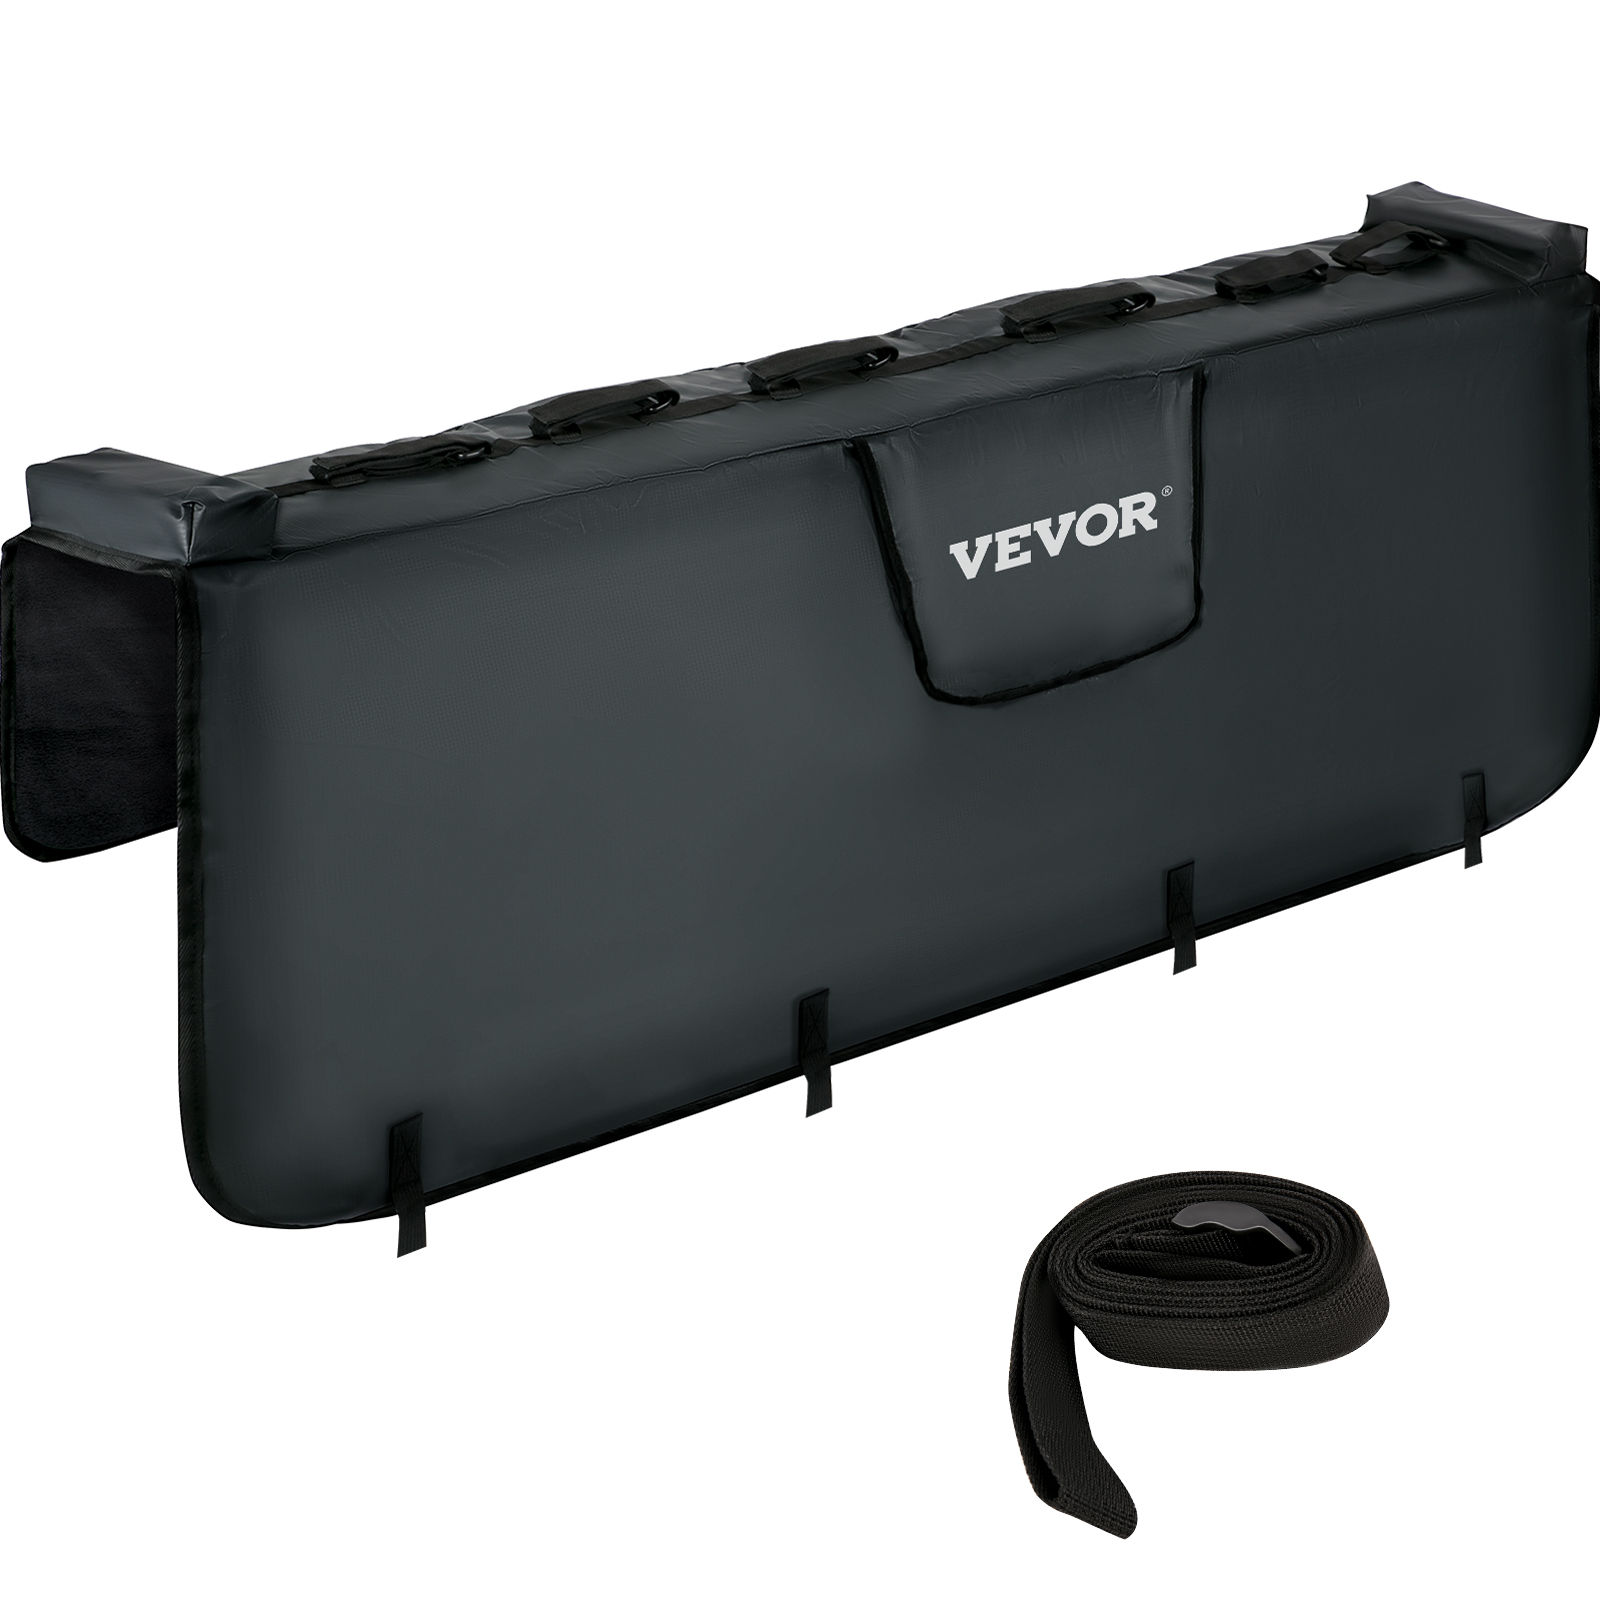 Vevor Tailgate Pad For Bikes Tailgate Protection Cover Carries Up To 6